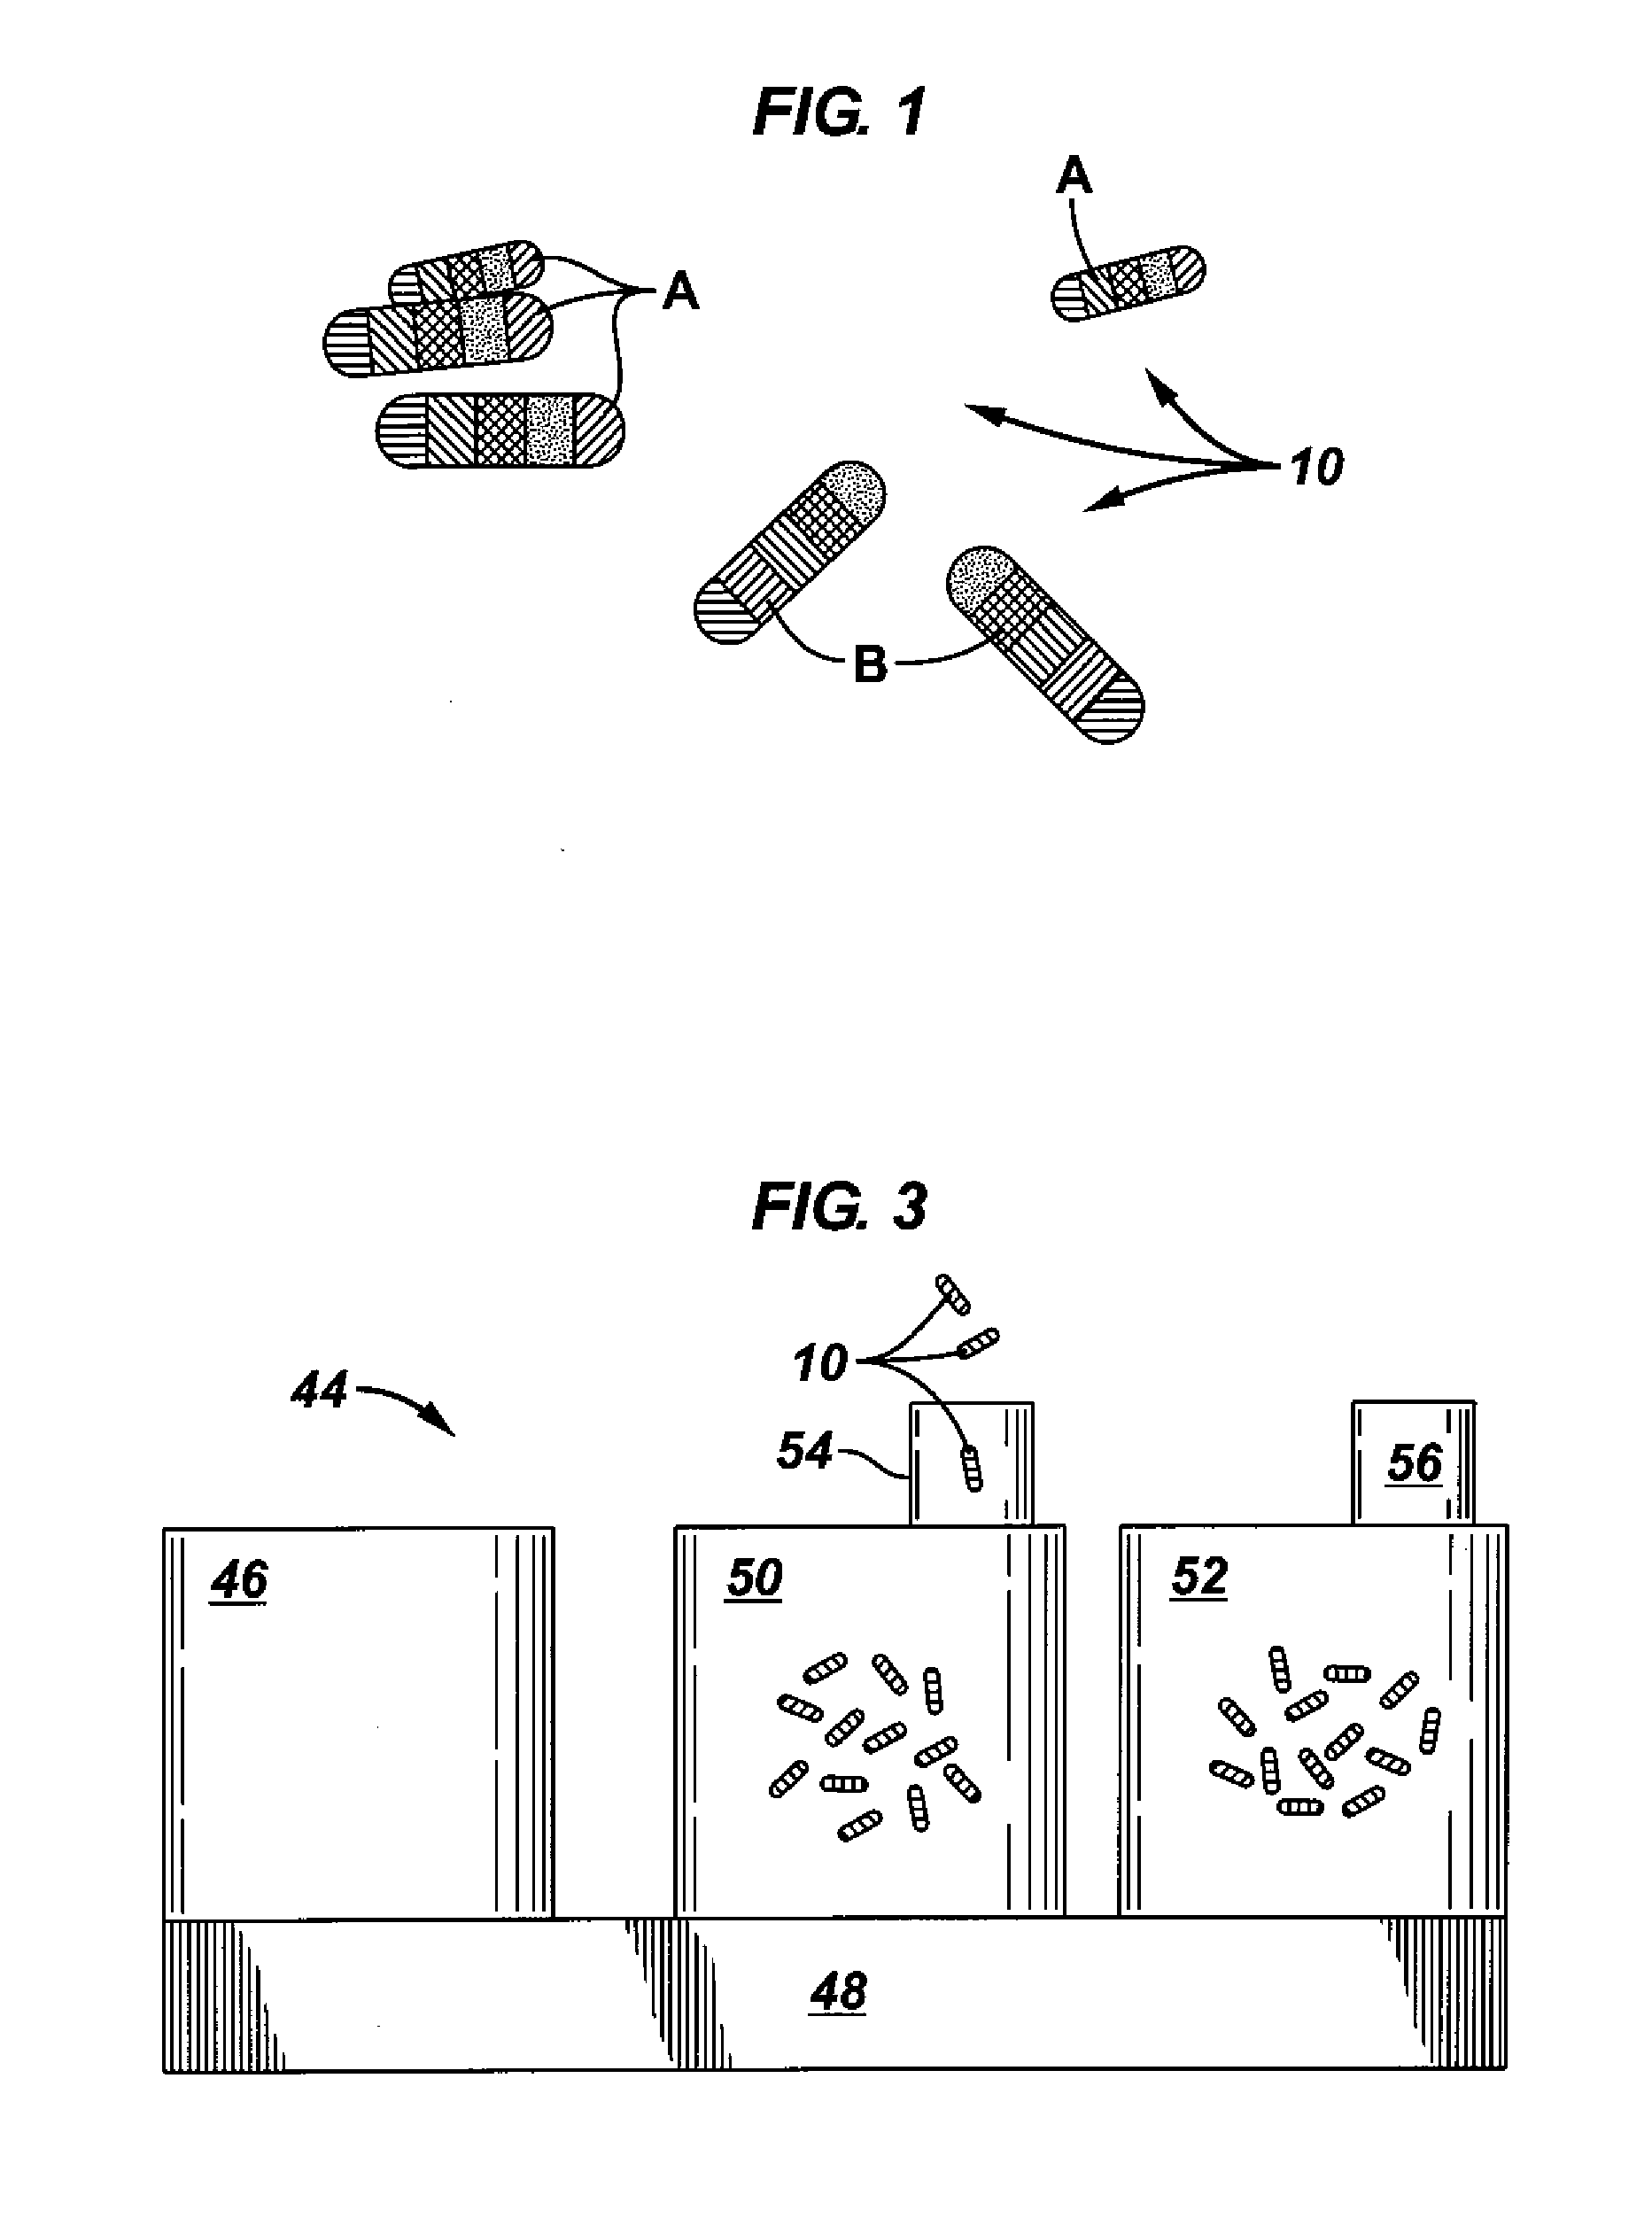 Coded optical emission particles for subsurface use